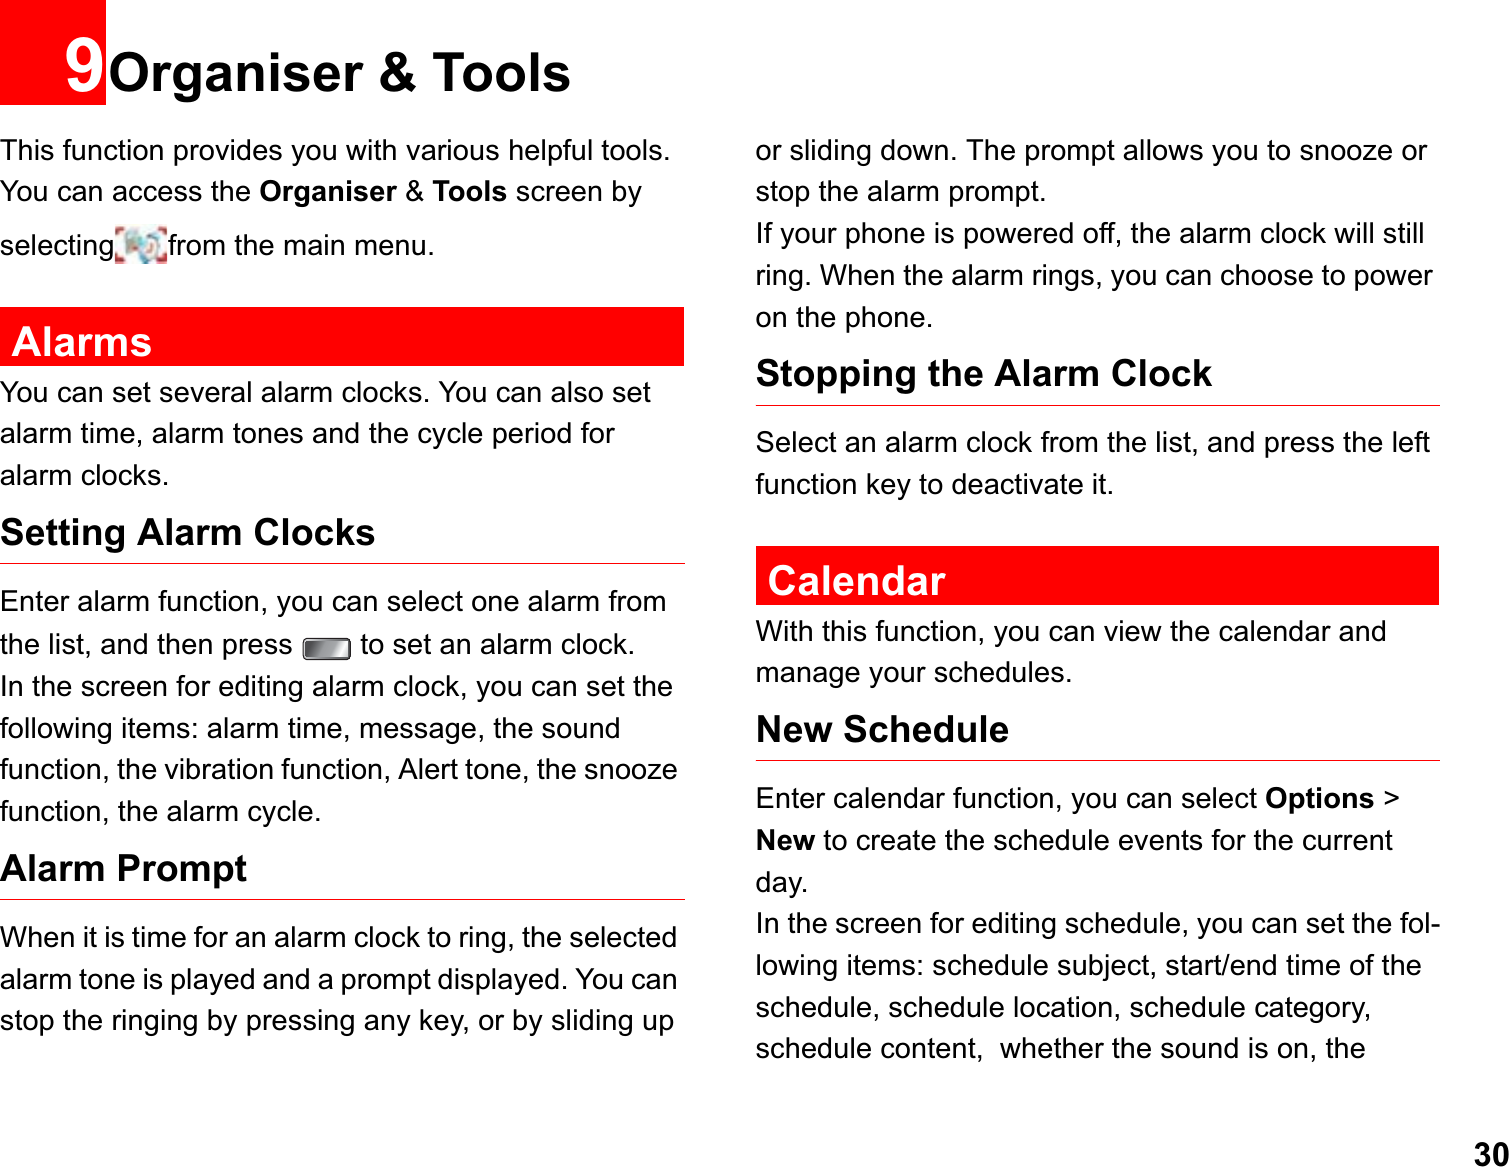 309Organiser &amp; ToolsThis function provides you with various helpful tools. You can access the Organiser &amp; Tools screen by selecting from the main menu.AlarmsYou can set several alarm clocks. You can also set alarm time, alarm tones and the cycle period for alarm clocks.  Setting Alarm ClocksEnter alarm function, you can select one alarm from the list, and then press   to set an alarm clock.In the screen for editing alarm clock, you can set the following items: alarm time, message, the sound function, the vibration function, Alert tone, the snooze function, the alarm cycle.Alarm PromptWhen it is time for an alarm clock to ring, the selected alarm tone is played and a prompt displayed. You can stop the ringing by pressing any key, or by sliding up or sliding down. The prompt allows you to snooze or stop the alarm prompt.If your phone is powered off, the alarm clock will still ring. When the alarm rings, you can choose to power on the phone.Stopping the Alarm ClockSelect an alarm clock from the list, and press the left function key to deactivate it.CalendarWith this function, you can view the calendar and manage your schedules.New ScheduleEnter calendar function, you can select Options &gt; New to create the schedule events for the current day.In the screen for editing schedule, you can set the fol-lowing items: schedule subject, start/end time of the schedule, schedule location, schedule category, schedule content,  whether the sound is on, the 